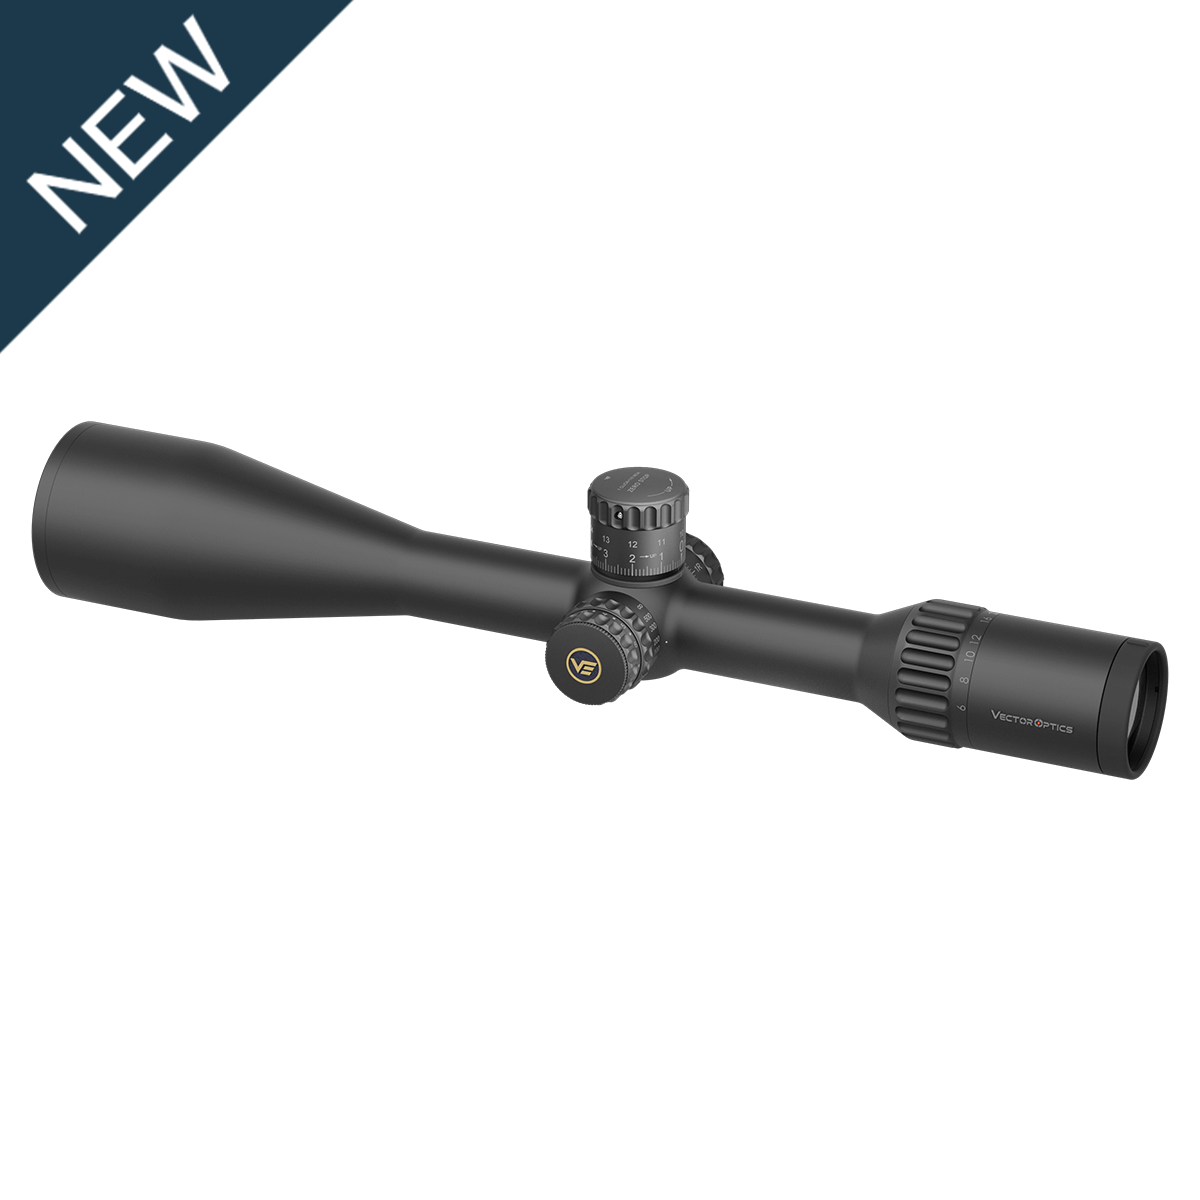 Continental x8 6-48x56 ED MIL Tactical Rifle Scope